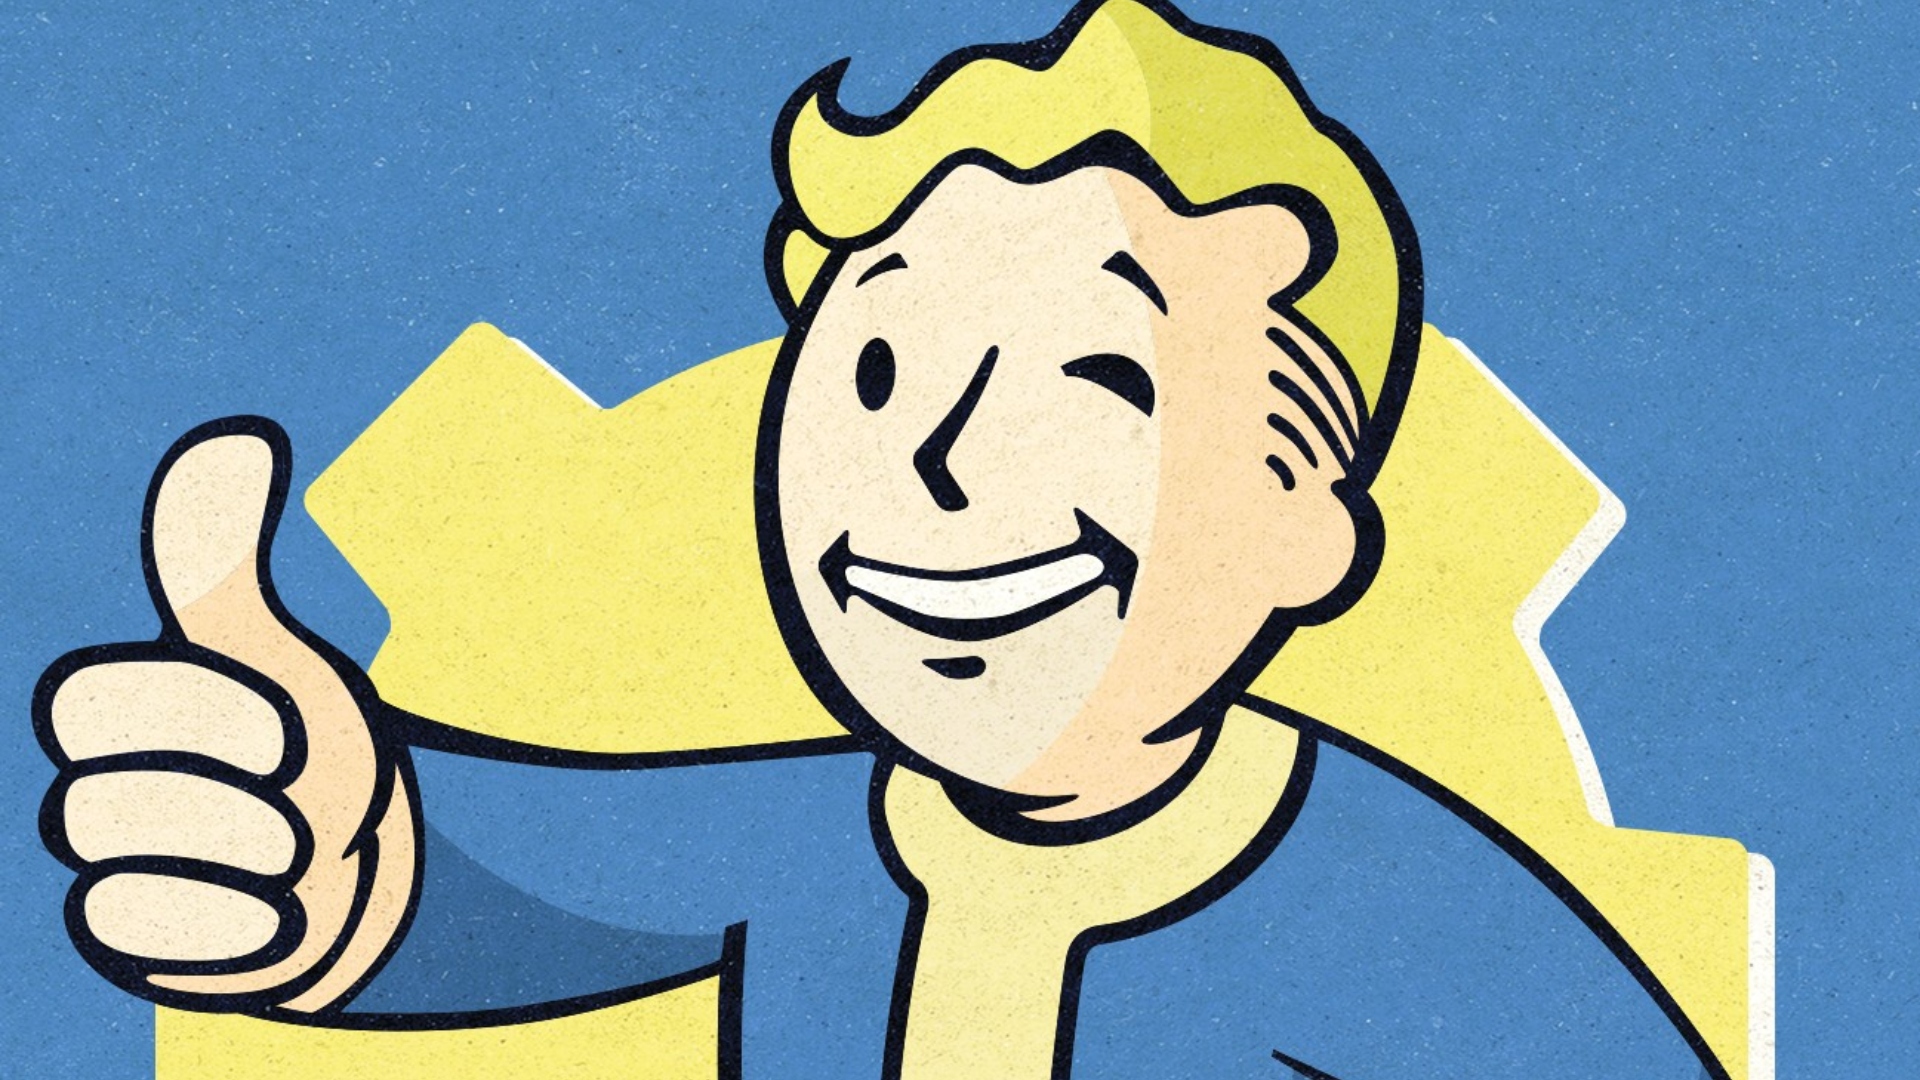 Fallout 4 is now completely DRM free, and available for under $11